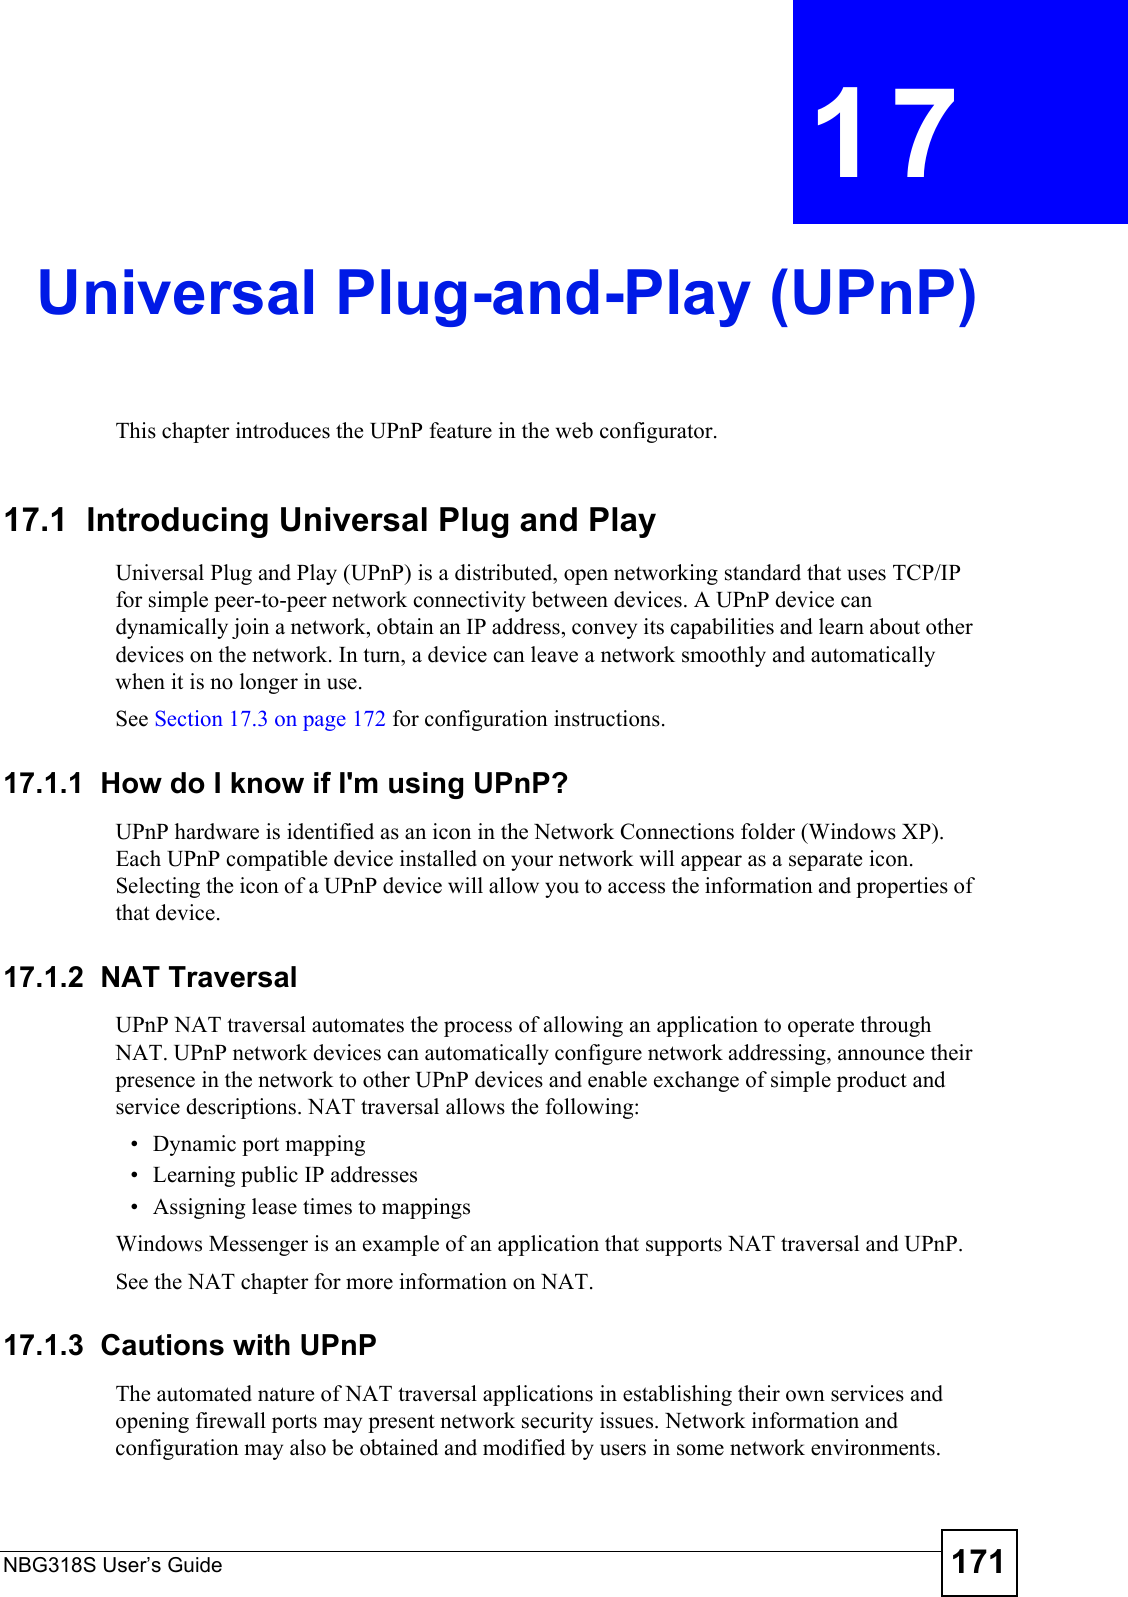 NBG318S User’s Guide 171CHAPTER  17 Universal Plug-and-Play (UPnP)This chapter introduces the UPnP feature in the web configurator.17.1  Introducing Universal Plug and Play Universal Plug and Play (UPnP) is a distributed, open networking standard that uses TCP/IP for simple peer-to-peer network connectivity between devices. A UPnP device can dynamically join a network, obtain an IP address, convey its capabilities and learn about other devices on the network. In turn, a device can leave a network smoothly and automatically when it is no longer in use.See Section 17.3 on page 172 for configuration instructions. 17.1.1  How do I know if I&apos;m using UPnP? UPnP hardware is identified as an icon in the Network Connections folder (Windows XP). Each UPnP compatible device installed on your network will appear as a separate icon. Selecting the icon of a UPnP device will allow you to access the information and properties of that device. 17.1.2  NAT TraversalUPnP NAT traversal automates the process of allowing an application to operate through NAT. UPnP network devices can automatically configure network addressing, announce their presence in the network to other UPnP devices and enable exchange of simple product and service descriptions. NAT traversal allows the following:• Dynamic port mapping• Learning public IP addresses• Assigning lease times to mappingsWindows Messenger is an example of an application that supports NAT traversal and UPnP. See the NAT chapter for more information on NAT.17.1.3  Cautions with UPnPThe automated nature of NAT traversal applications in establishing their own services and opening firewall ports may present network security issues. Network information and configuration may also be obtained and modified by users in some network environments. 